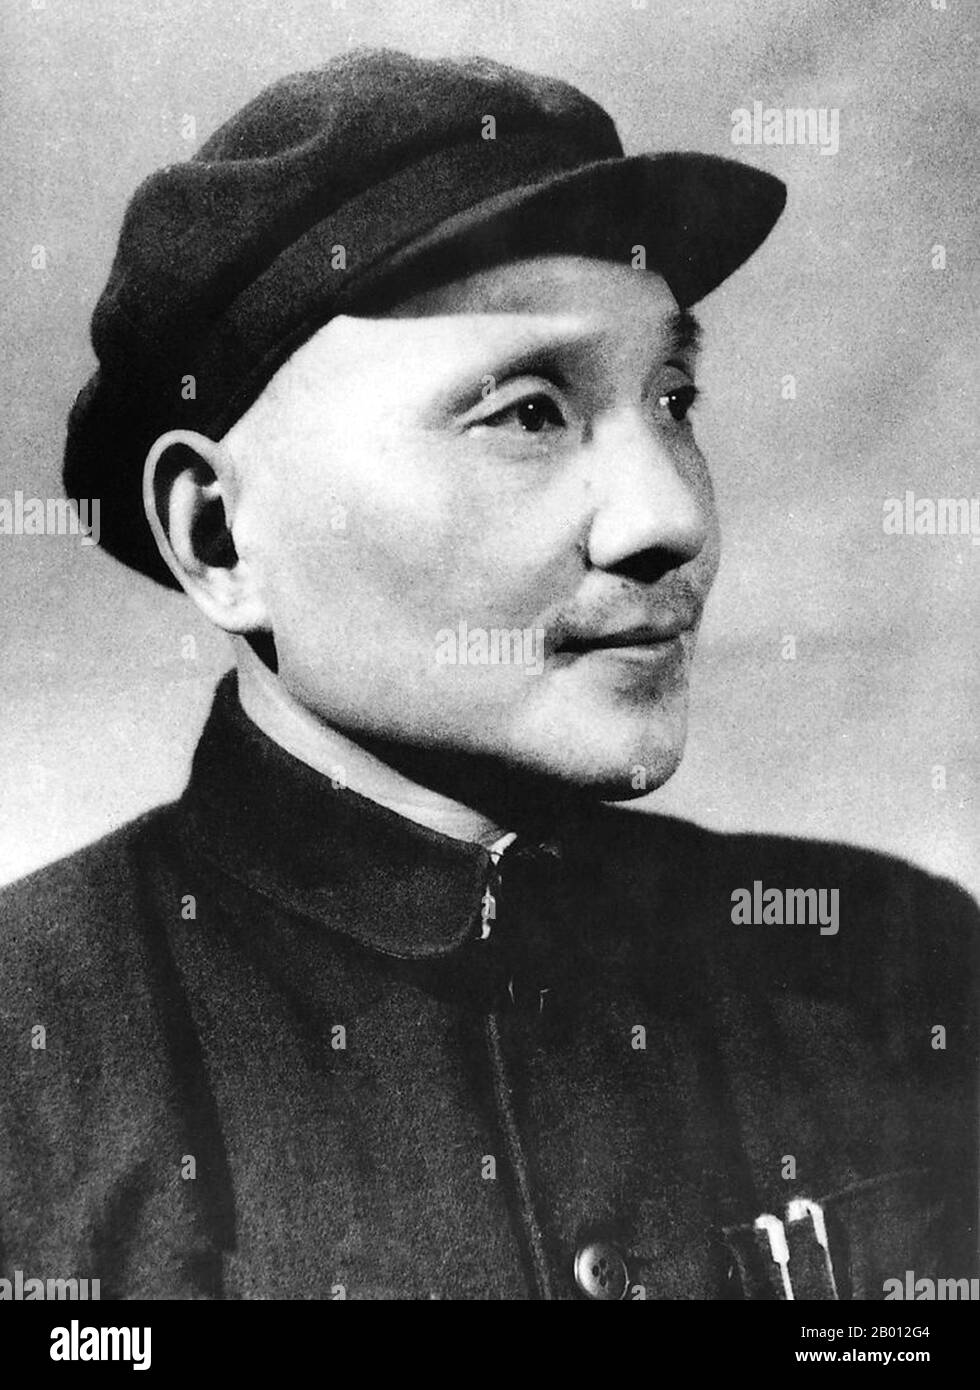 China: Deng Xiaoping (Teng Hsiao-p'ing, 1904-1997) c. 1949.  Deng Xiaoping (Teng Hsiao-p'ing; 22 August 1904  – 19 February 1997) was a Chinese politician, statesman, theorist, and diplomat. As leader of the Communist Party of China, Deng was a reformer who led China towards a market economy. While Deng never held office as the head of state, head of government or General Secretary of the Communist Party of China (historically the highest position in Communist China), he nonetheless served as the paramount leader of the People's Republic of China from 1978 to 1992. Stock Photo